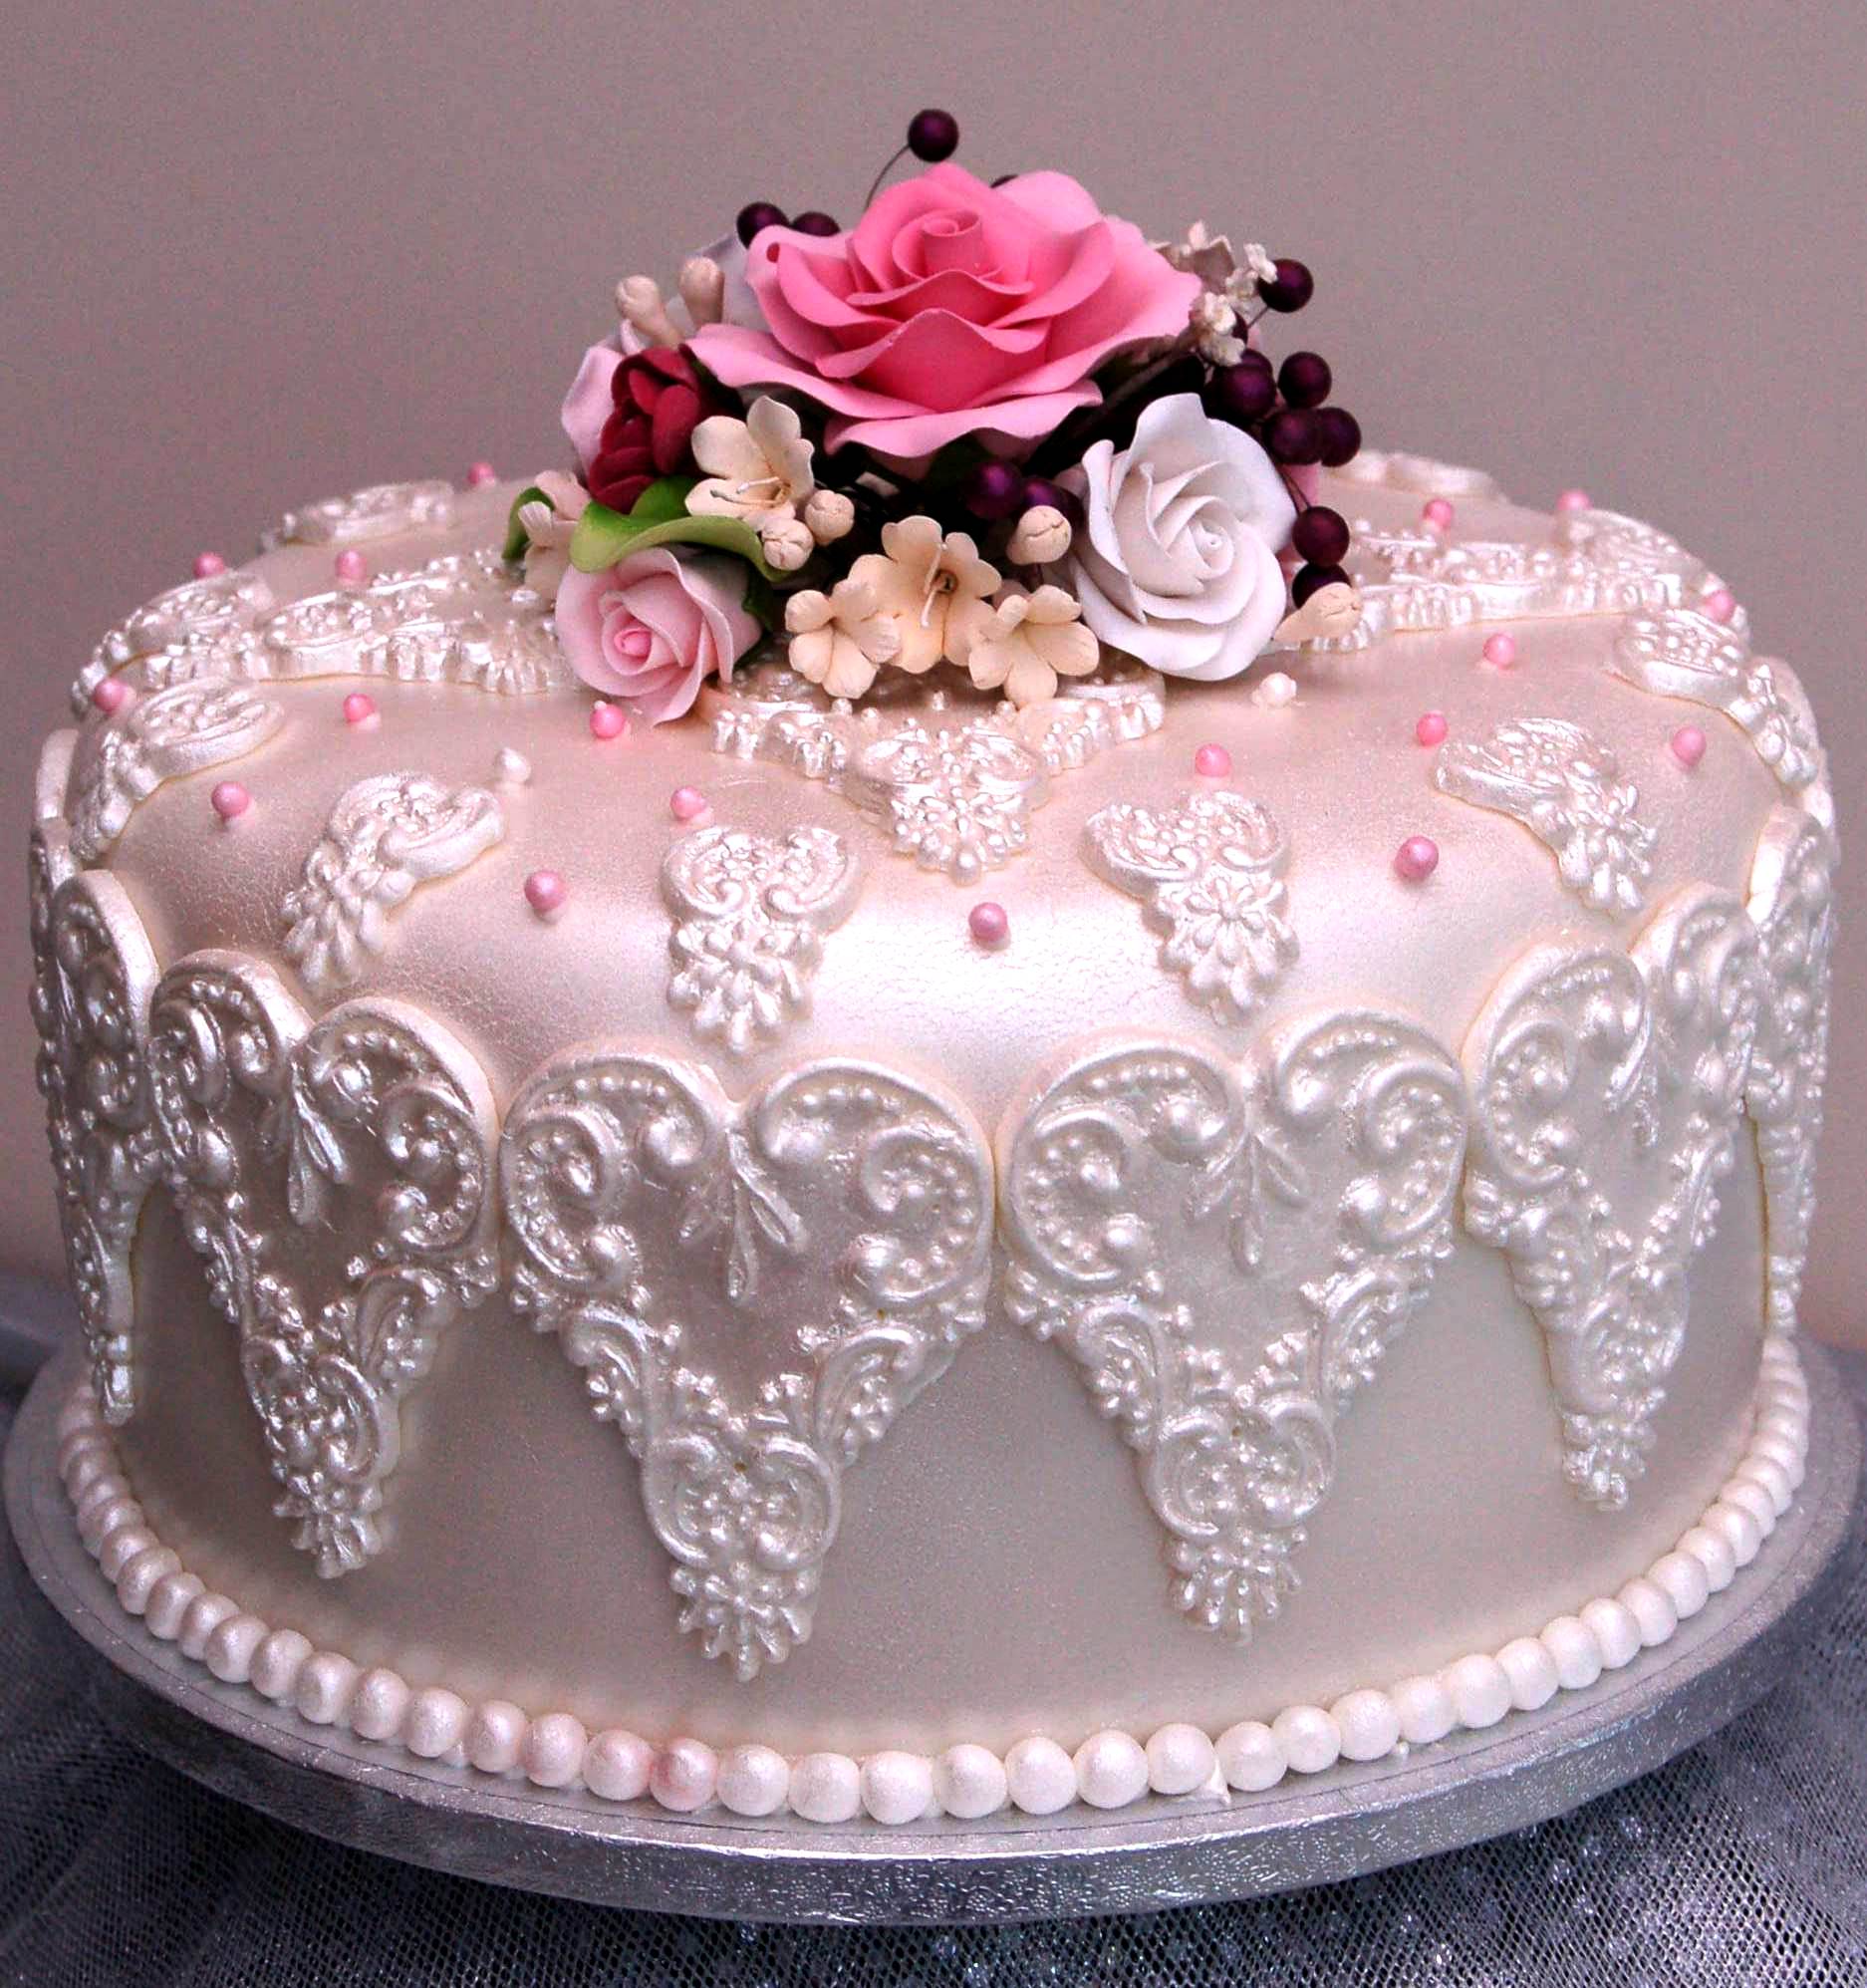 Birthday Cakes Images: Good Cake For Birthday Brunch Beautiful ...